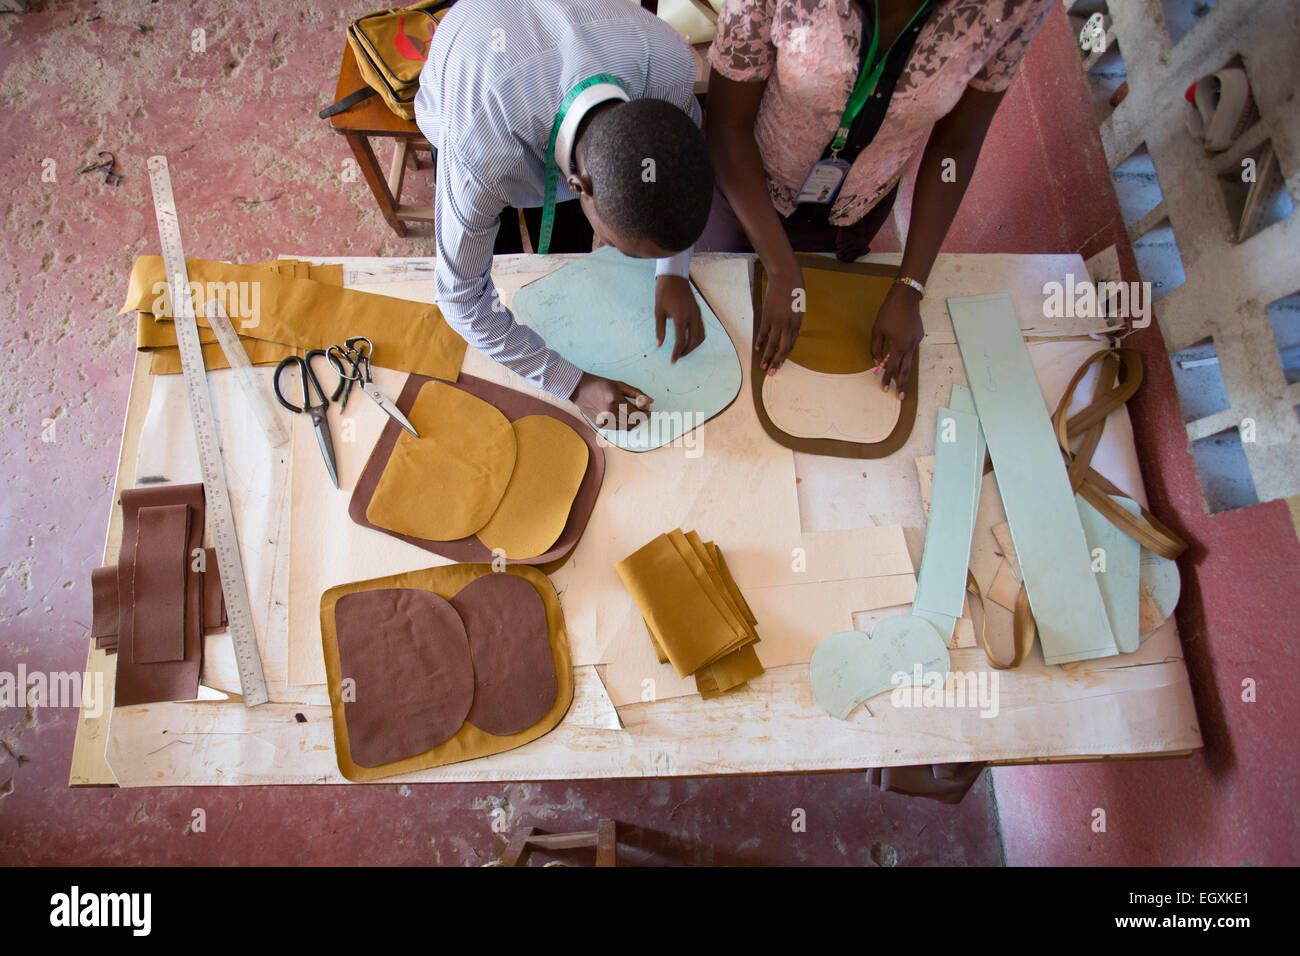 Artisans design hand-made bags in a workshop in Dar es Salaam, Tanzania, East Africa. Stock Photo